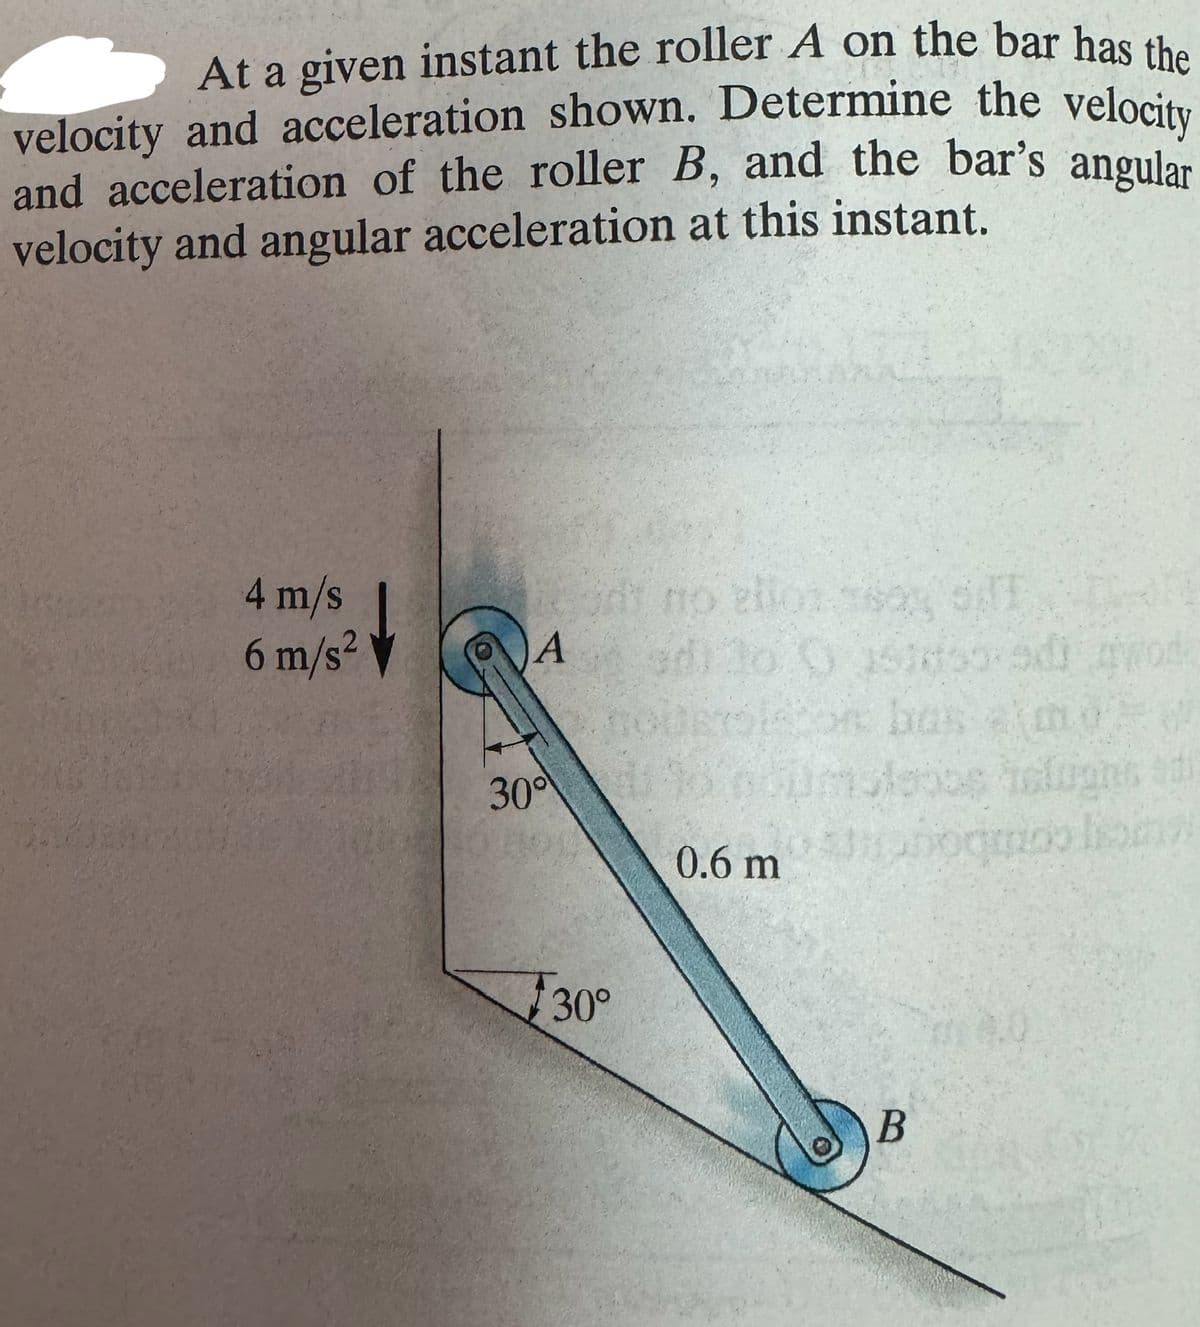 At a given instant the roller A on the bar has the
velocity and acceleration shown. Determine the velocity
and acceleration of the roller B, and the bar's angular
velocity and angular acceleration at this instant.
4 m/s
6 m/s²
no ellos say of
A
30°
d) to O 151ds-9d) wod
noberson bas moW
imoteoos telugnt d
0.6 mo lang
30°
B